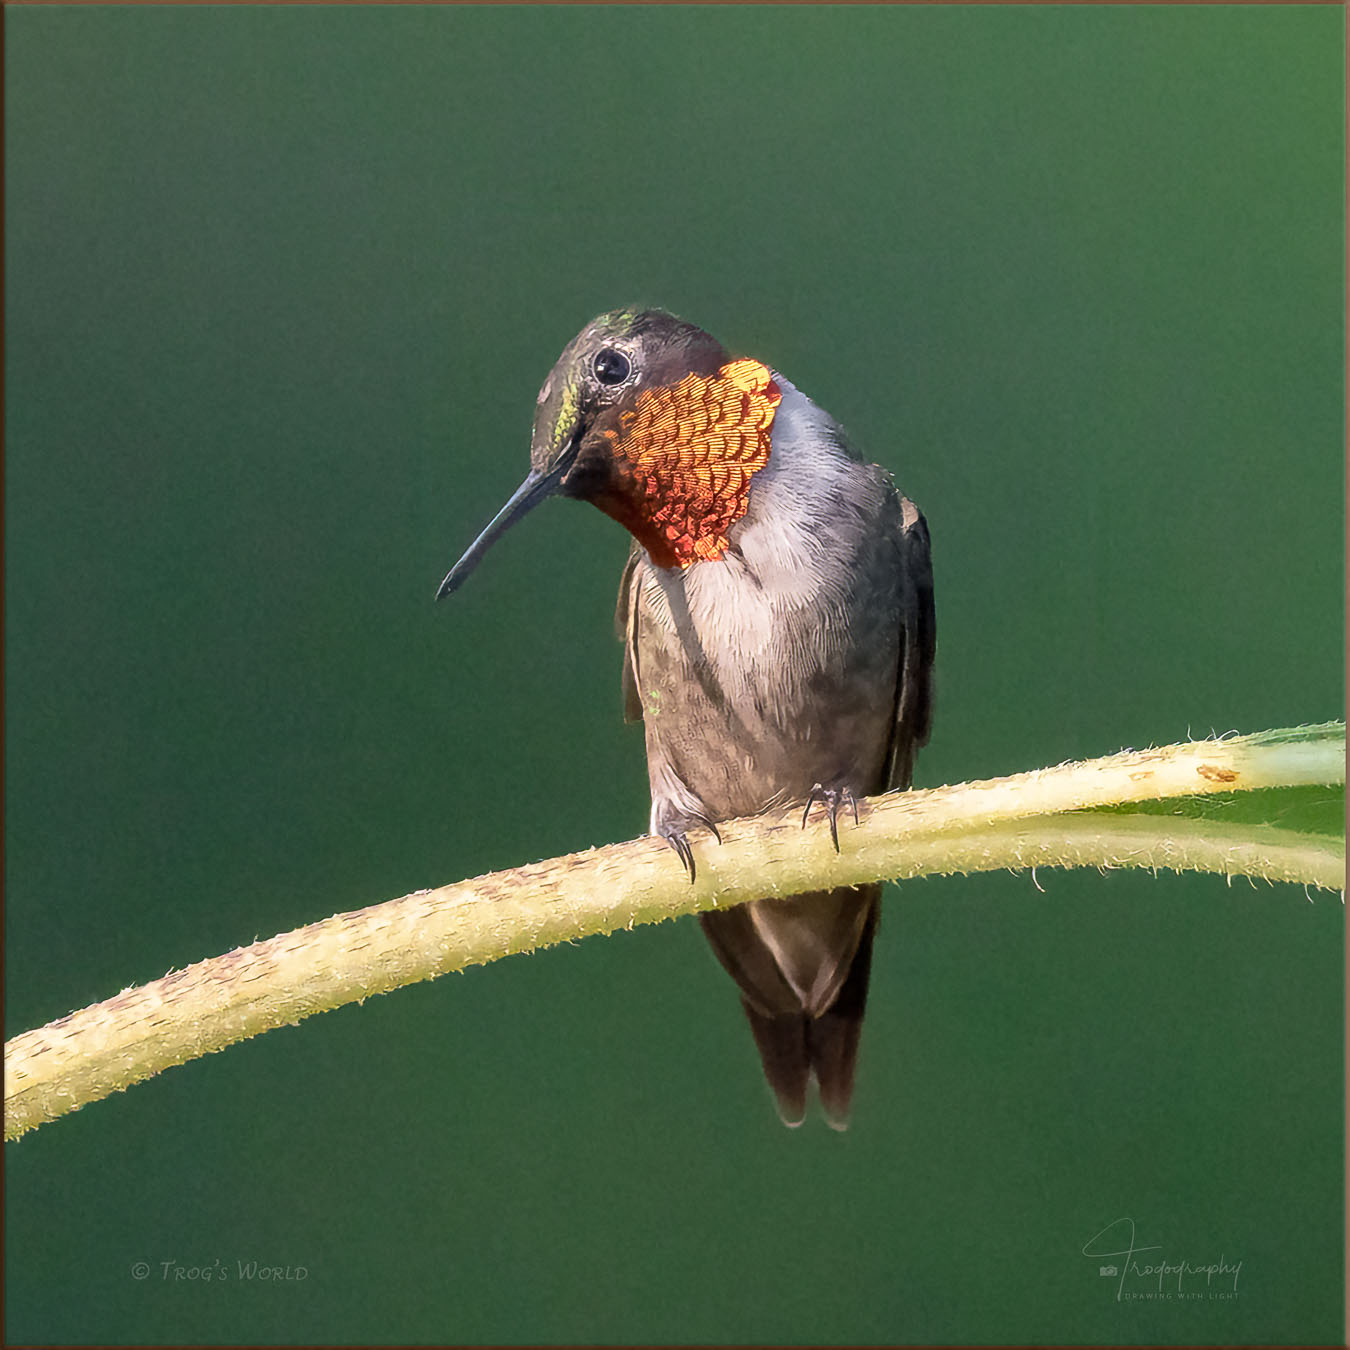 Male Ruby-throated Hummingbird taking a rest